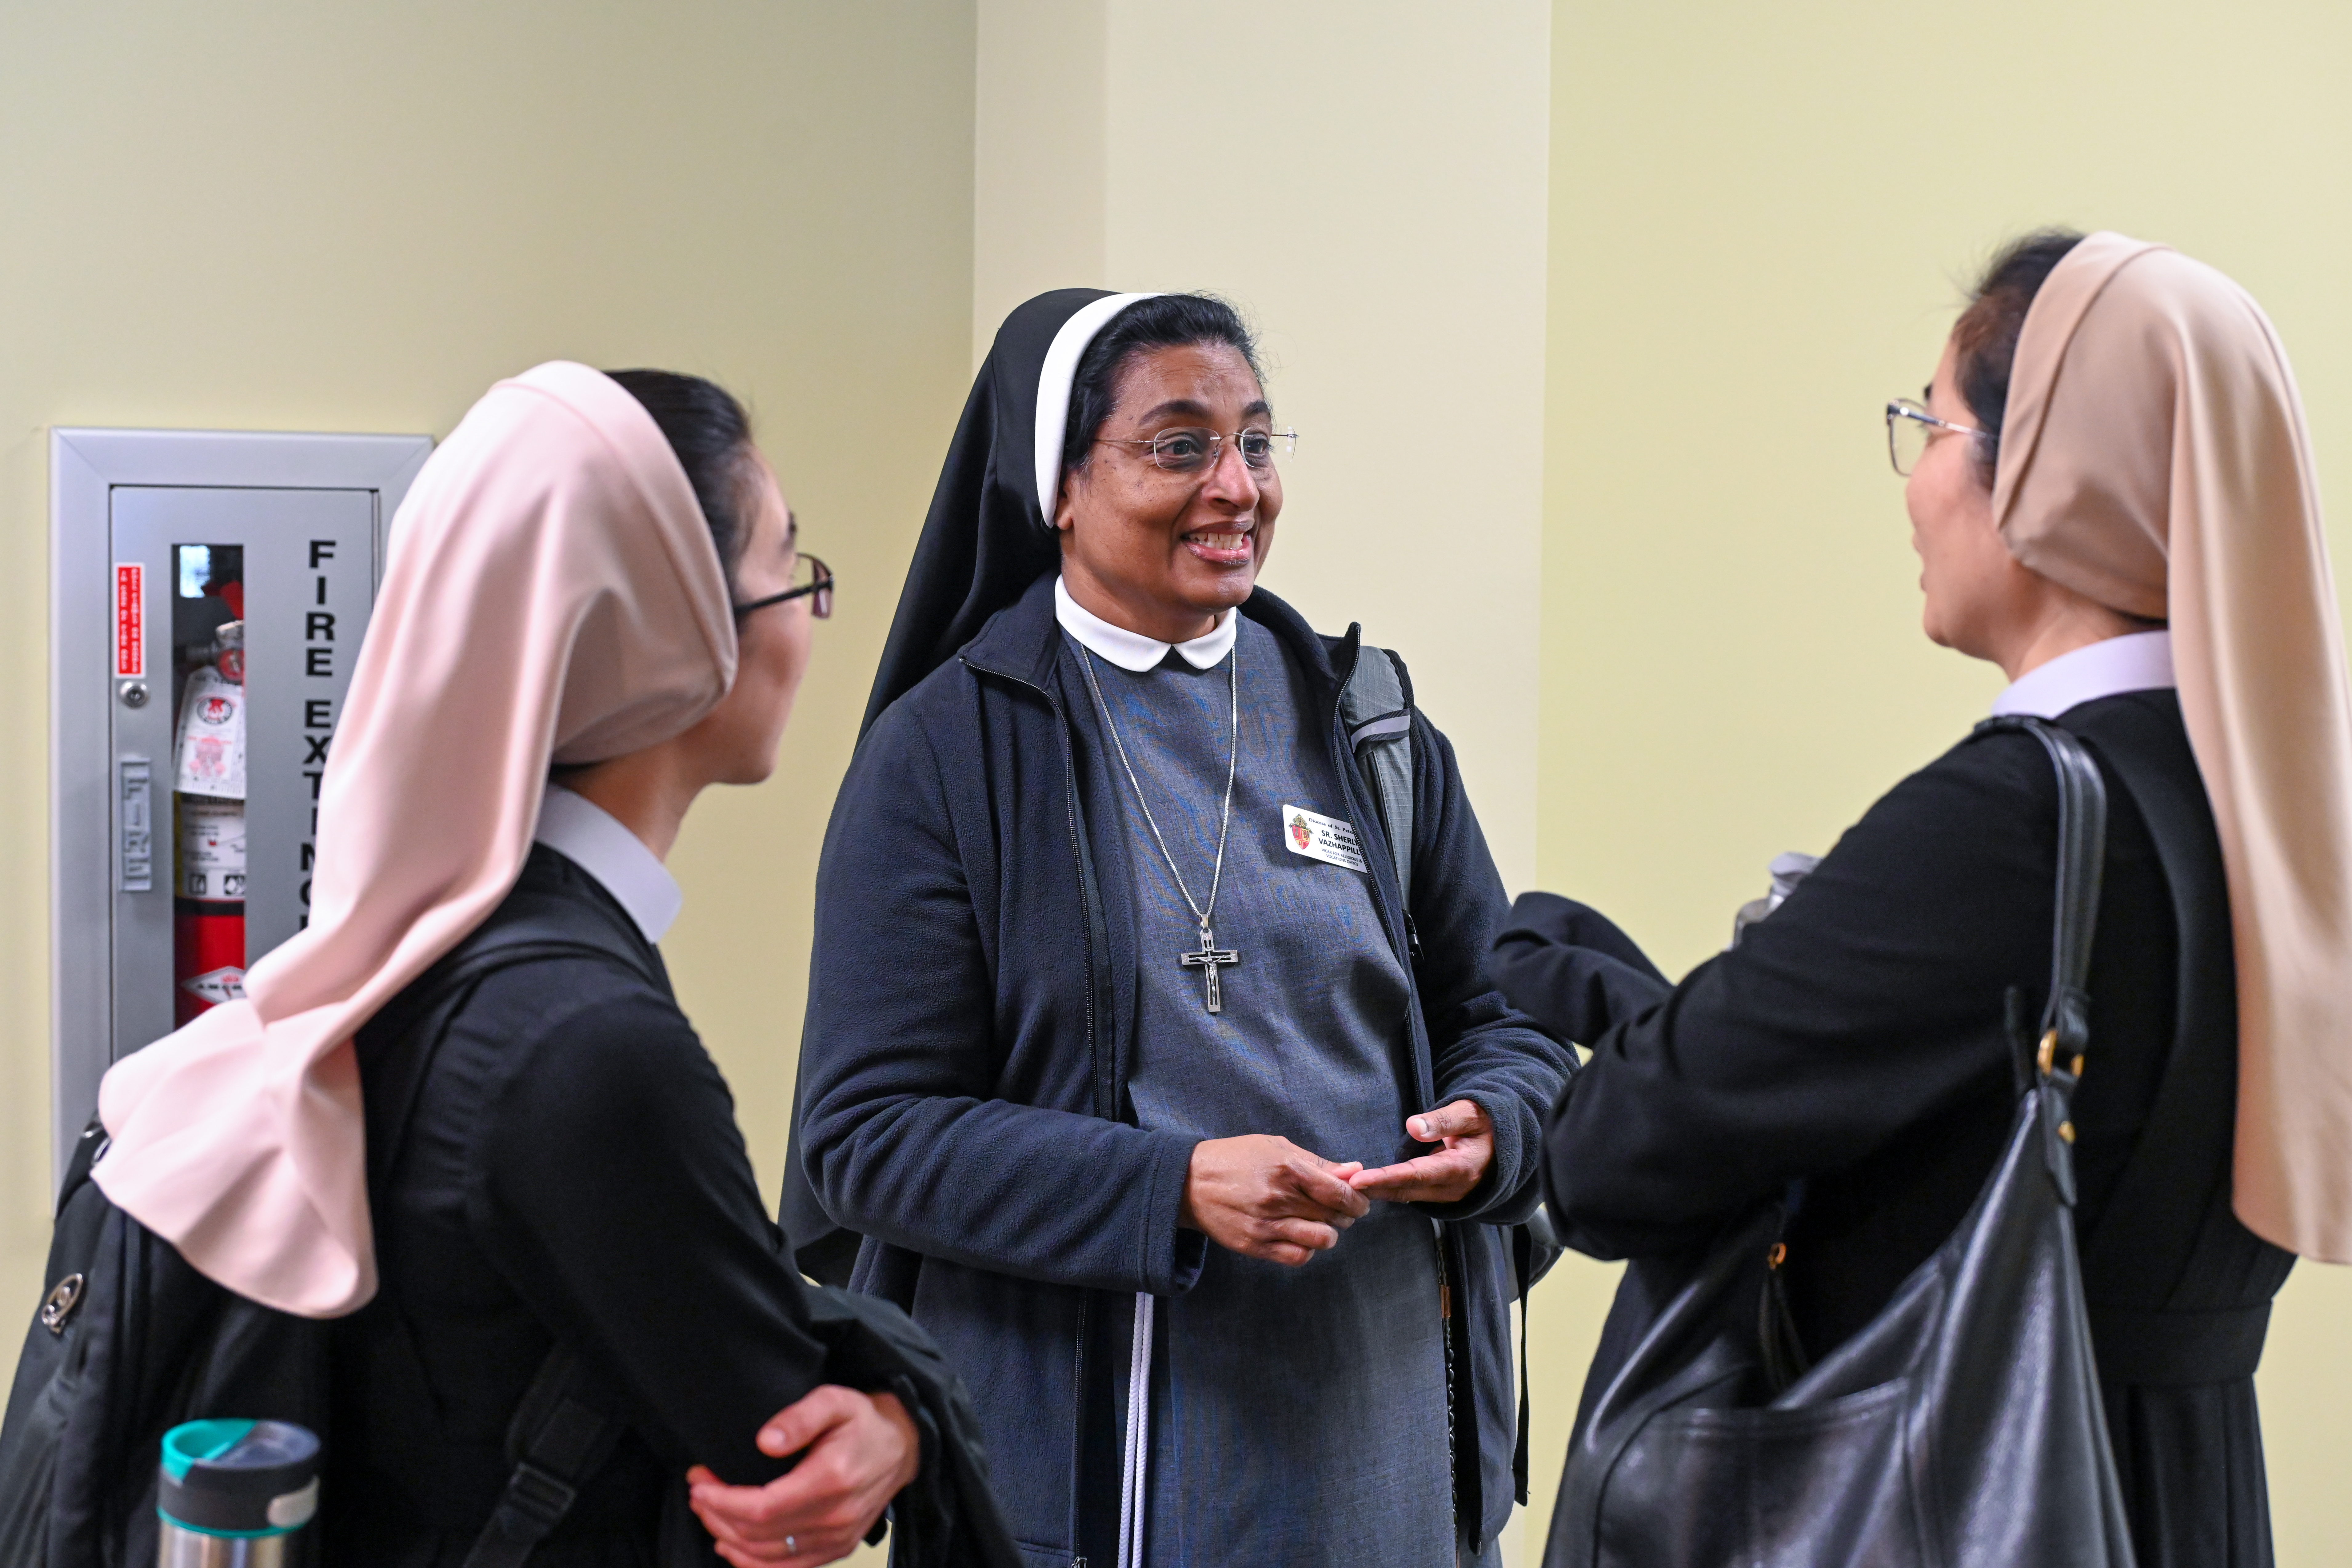 Sister Sherly Vazhappily, Associate Director of Vocations, speaks with other sisters at the Vocations Workshop